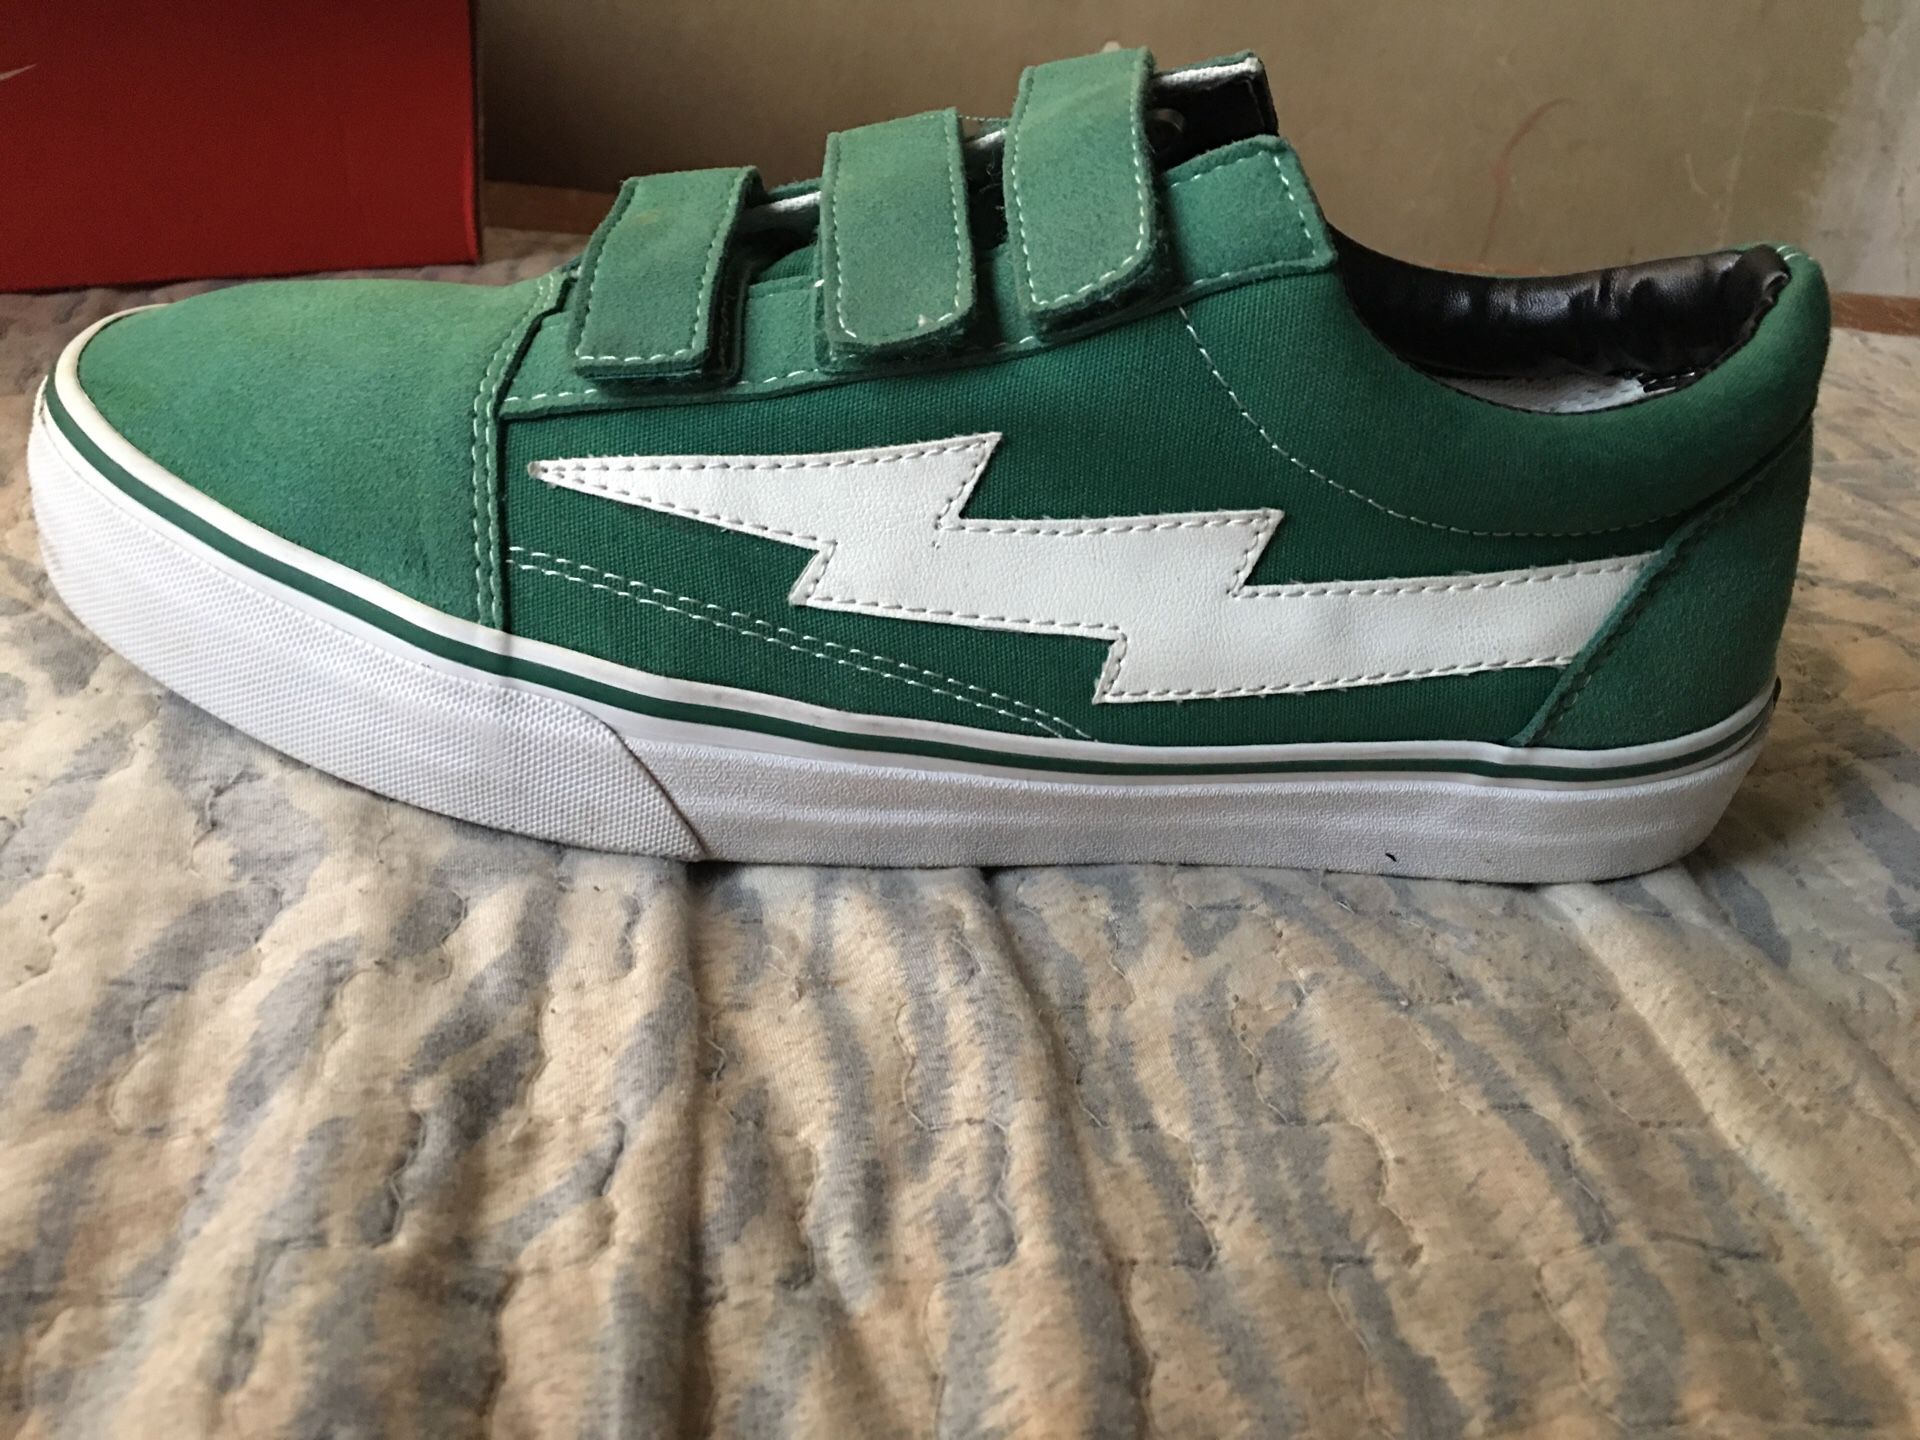 Revenge storm Velcro green worn 3x 9/10 condition hmu them gone asap size 11 for Sale in East Los Angeles, CA - OfferUp